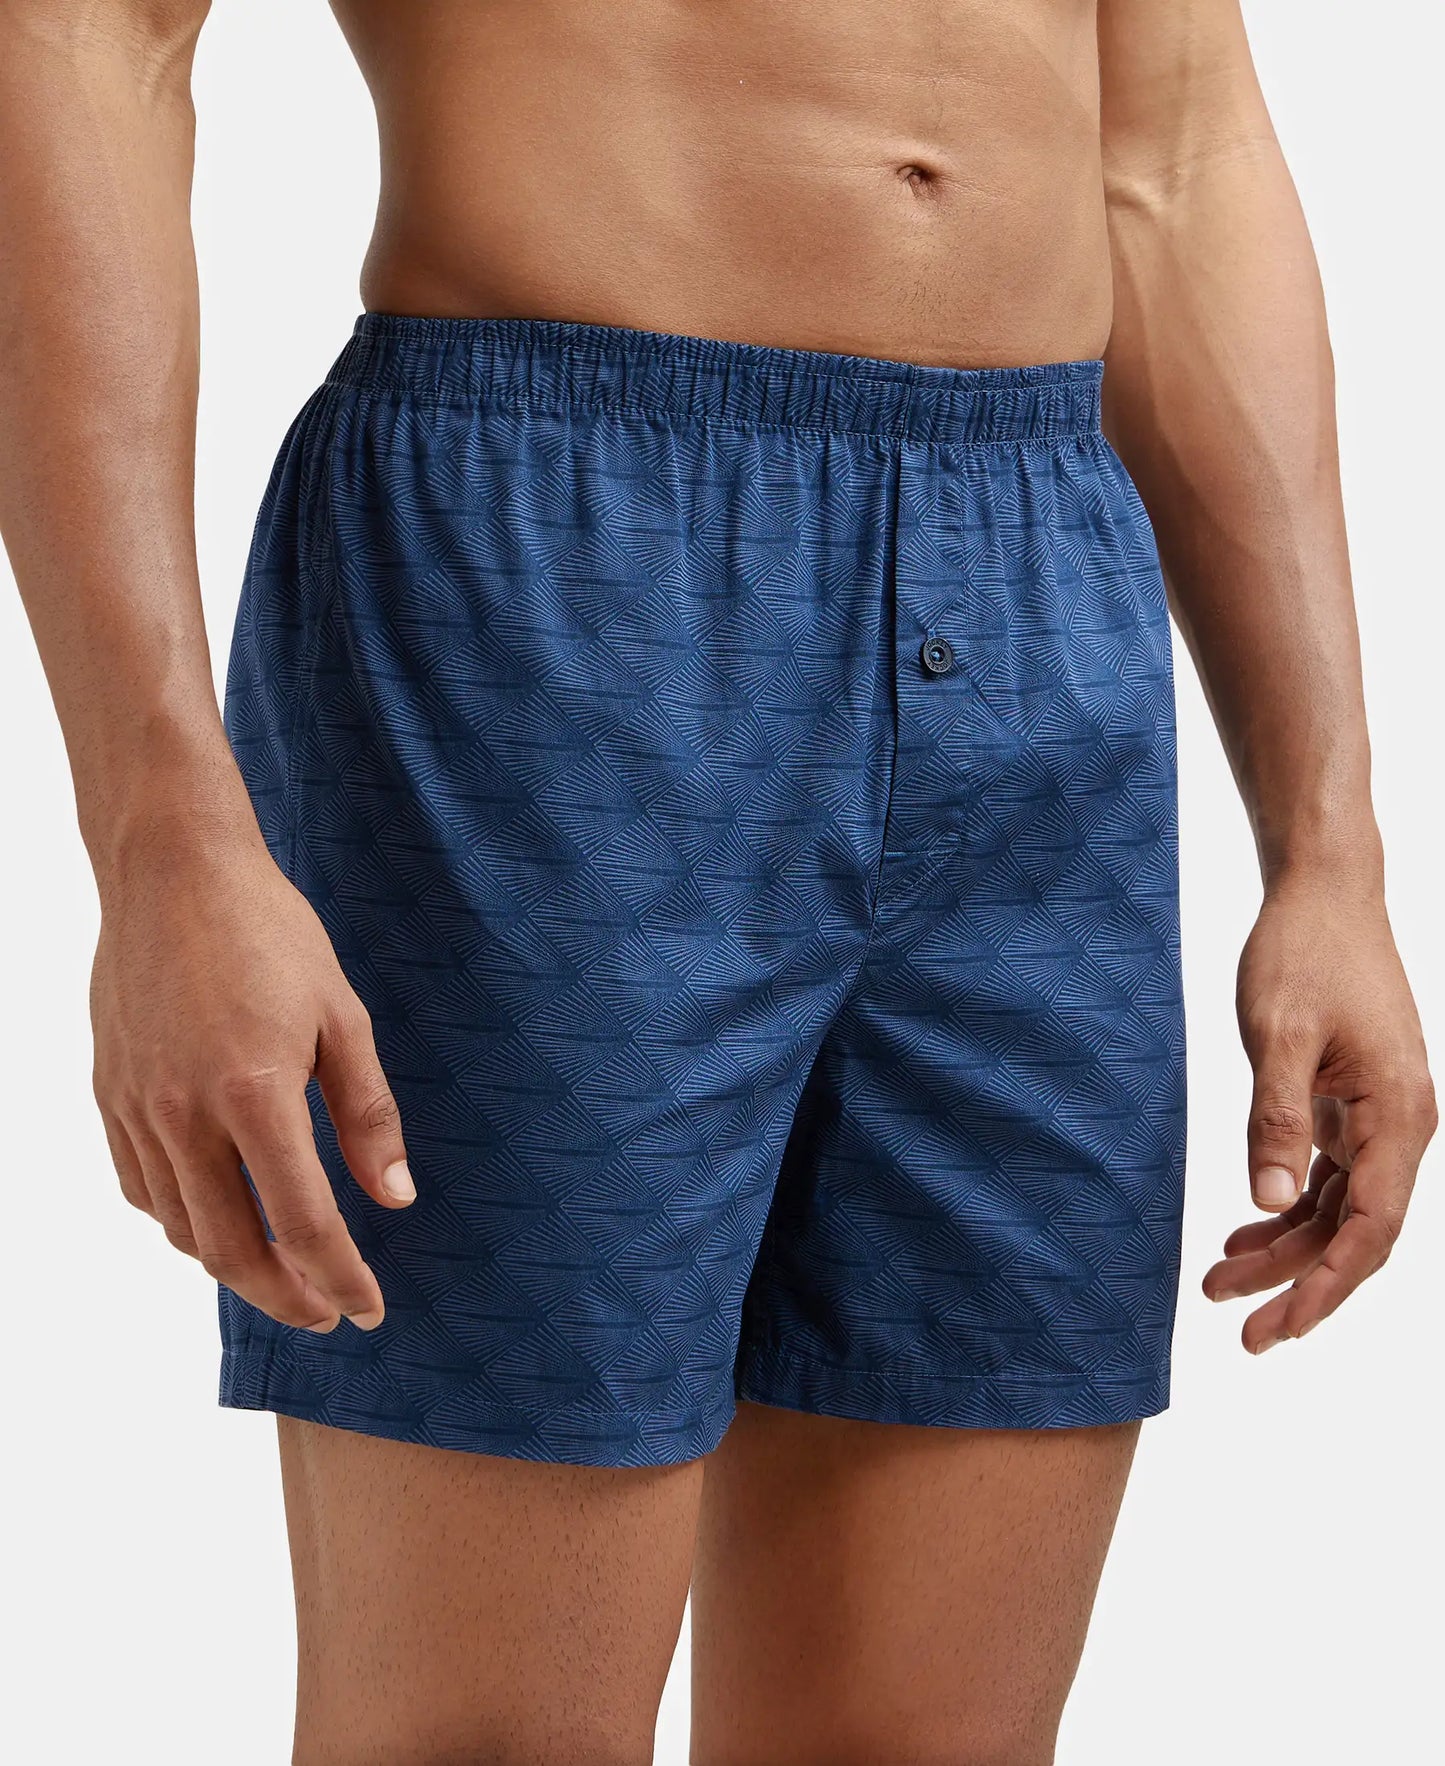 Super Combed Mercerized Cotton Woven Checkered Inner Boxers with Ultrasoft and Durable Inner Waistband - Black & Navy 2-5